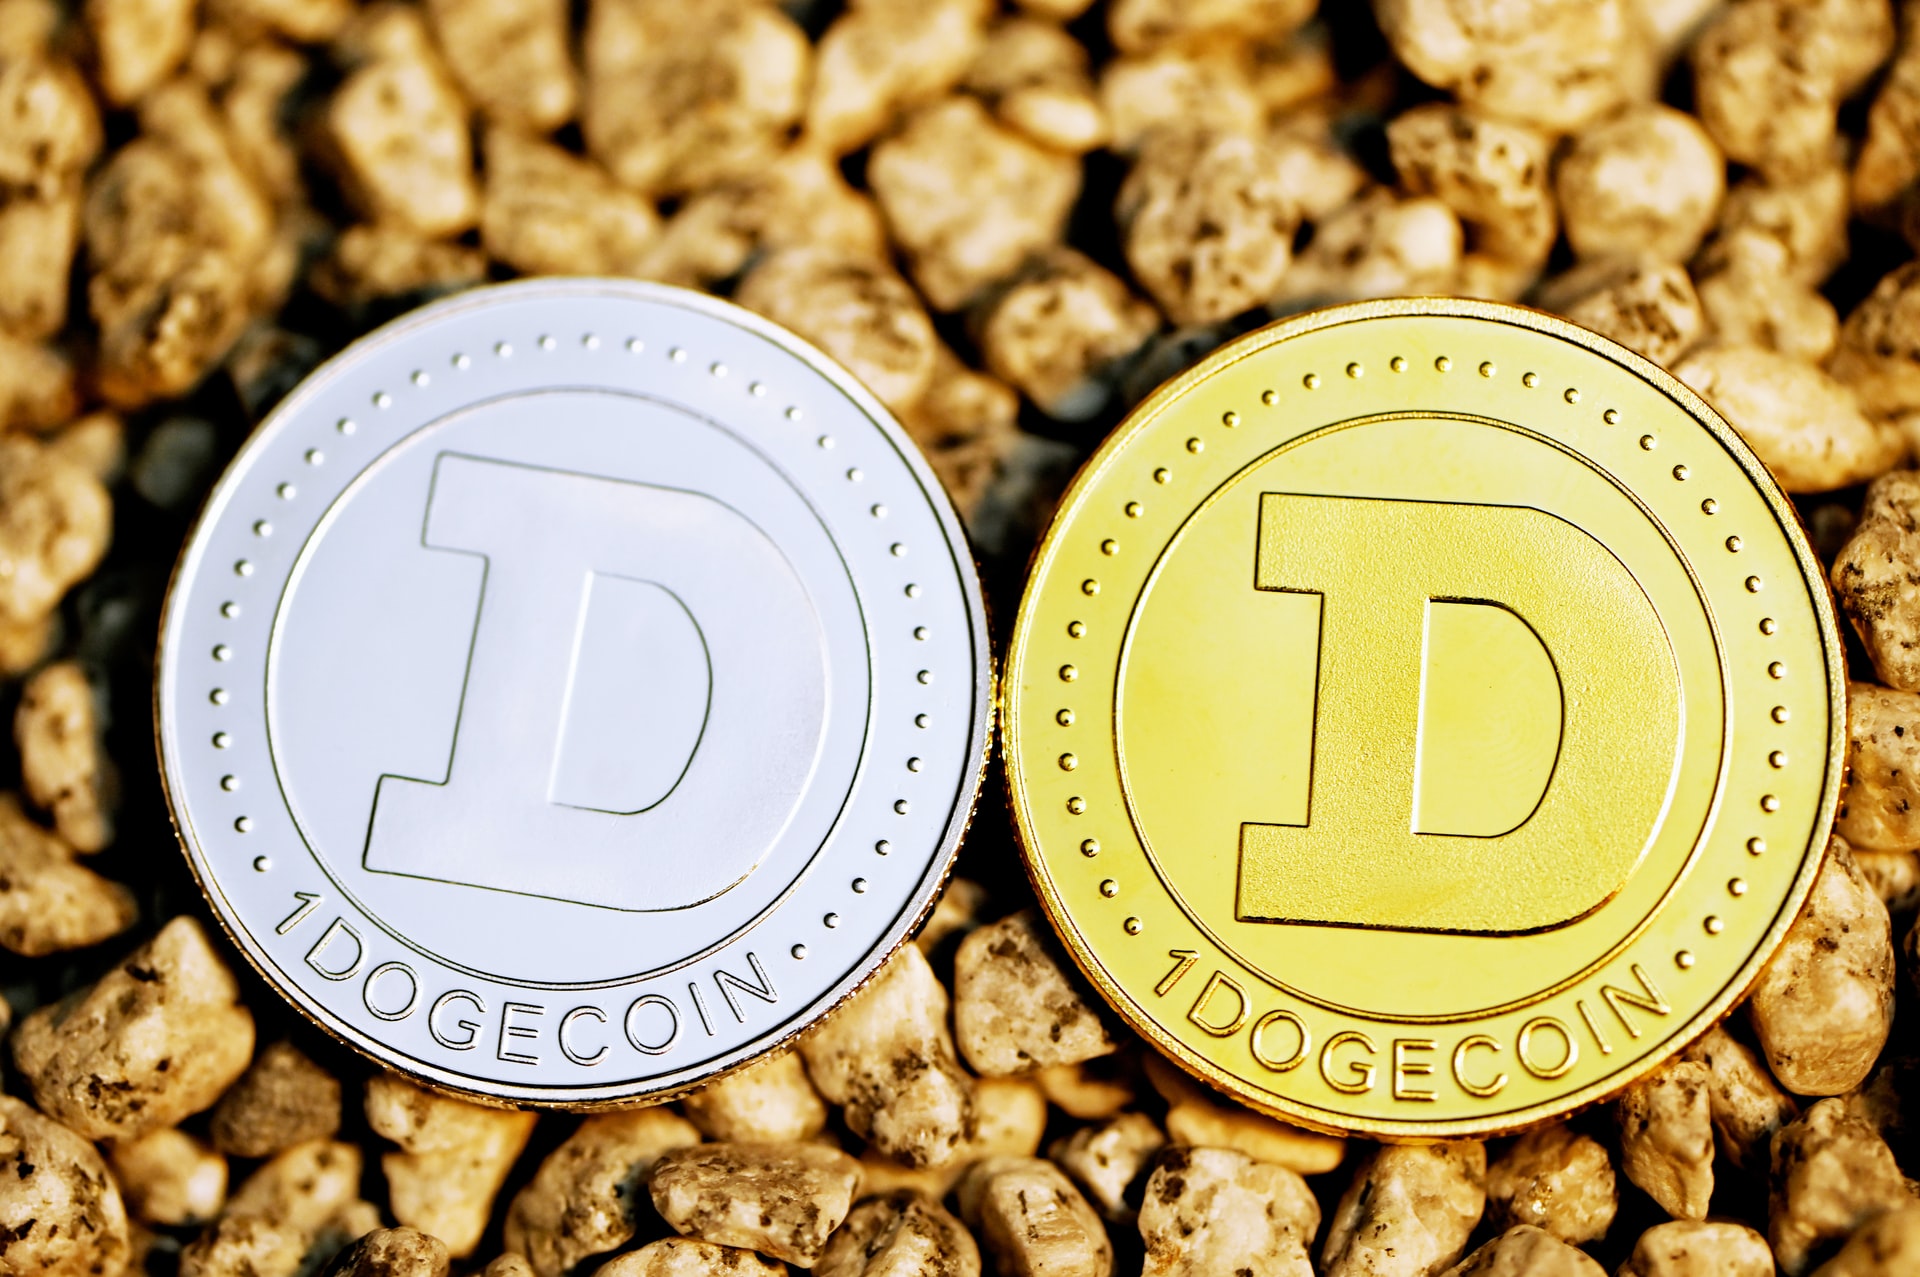 Dogecoin Has Formed A Bullish Reversal Pattern, What’s Next?